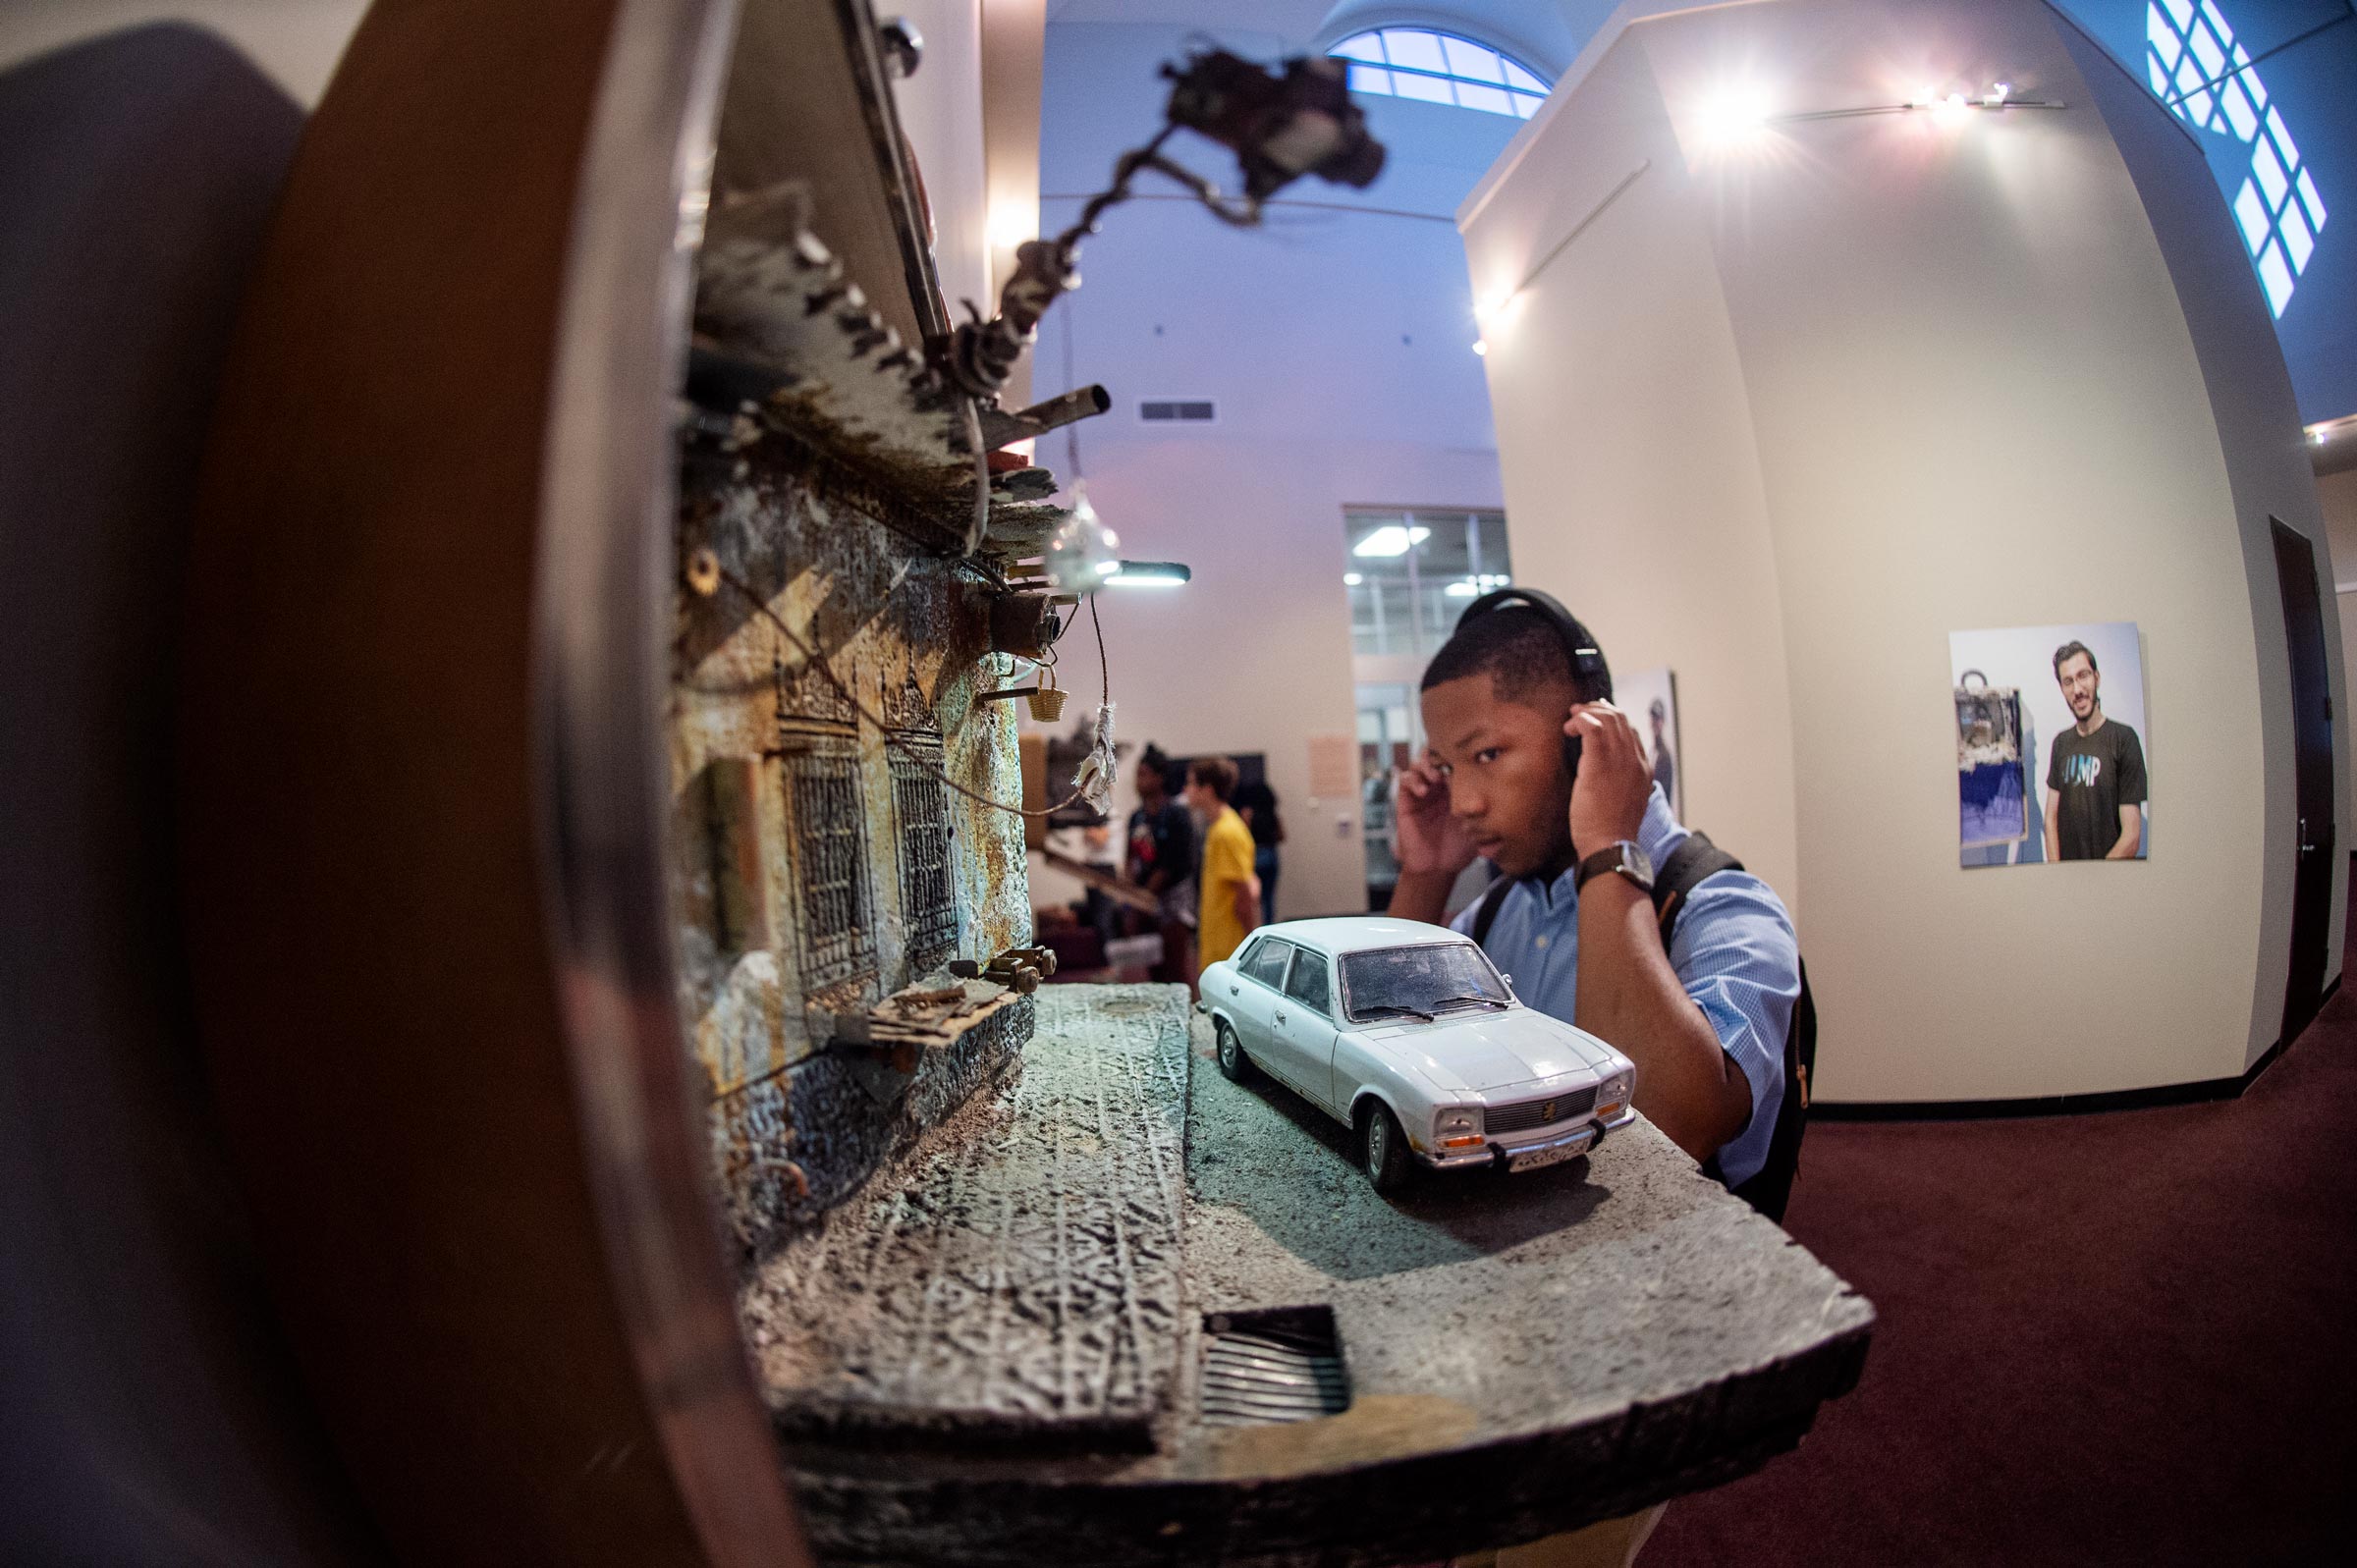 With the details of a suitcase diorama in the foreground, art major Christian Ivy listens to one of the audio clips accompanying the UNPACKED exhibition.